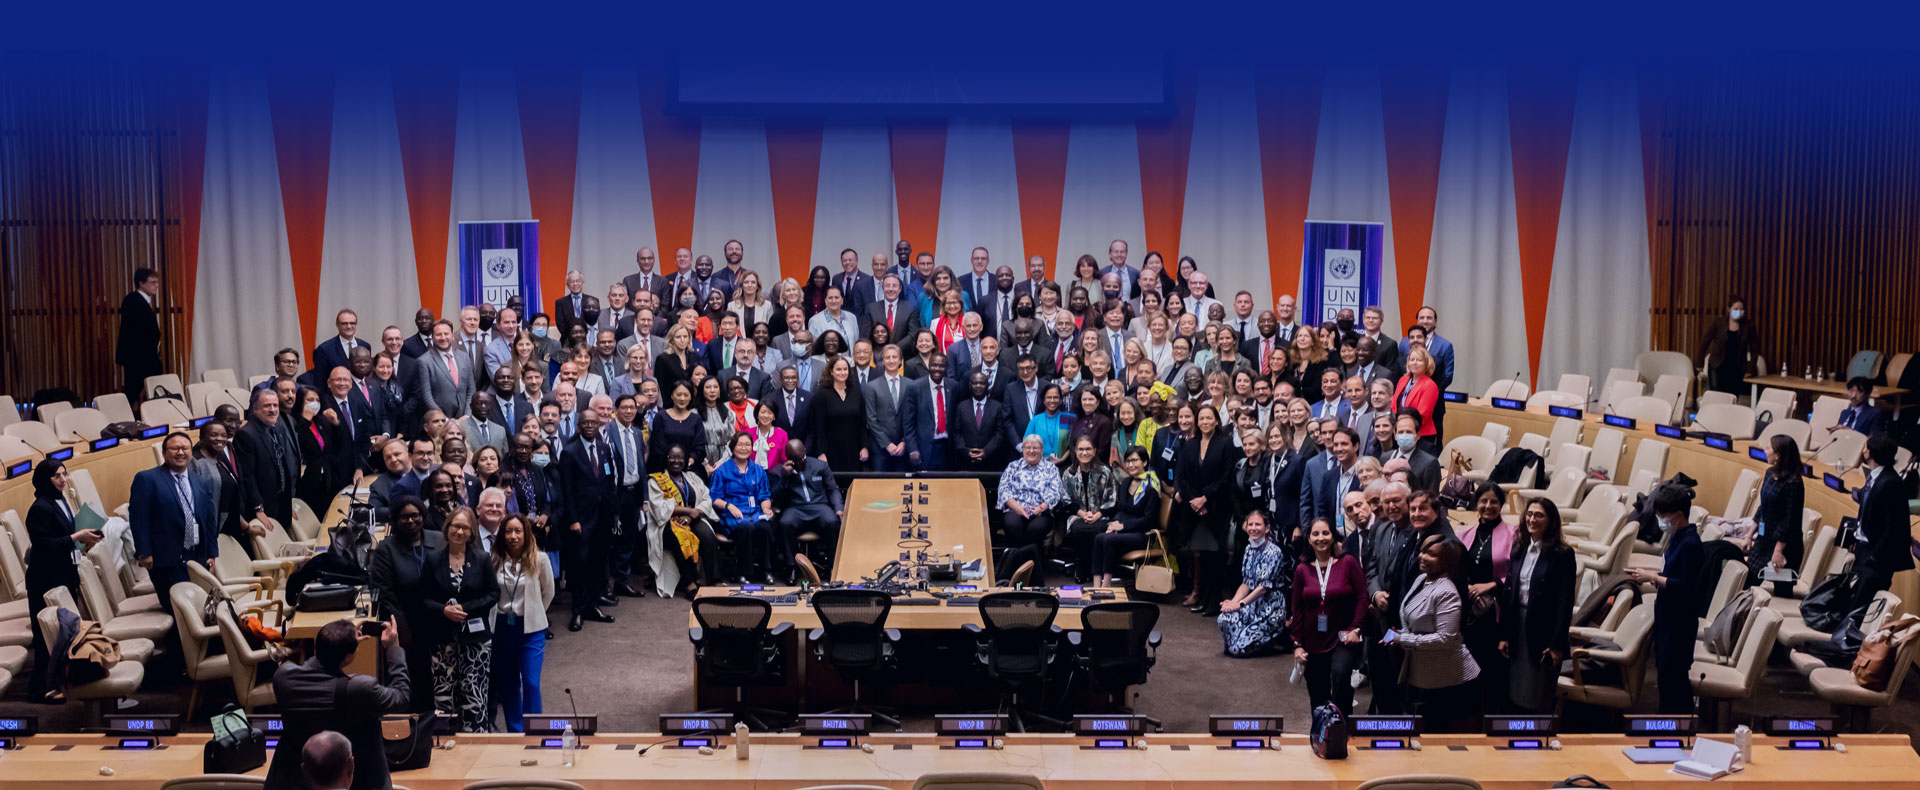 Group photo of UNDP's country leadership in the United Nation's ECOSOC hall